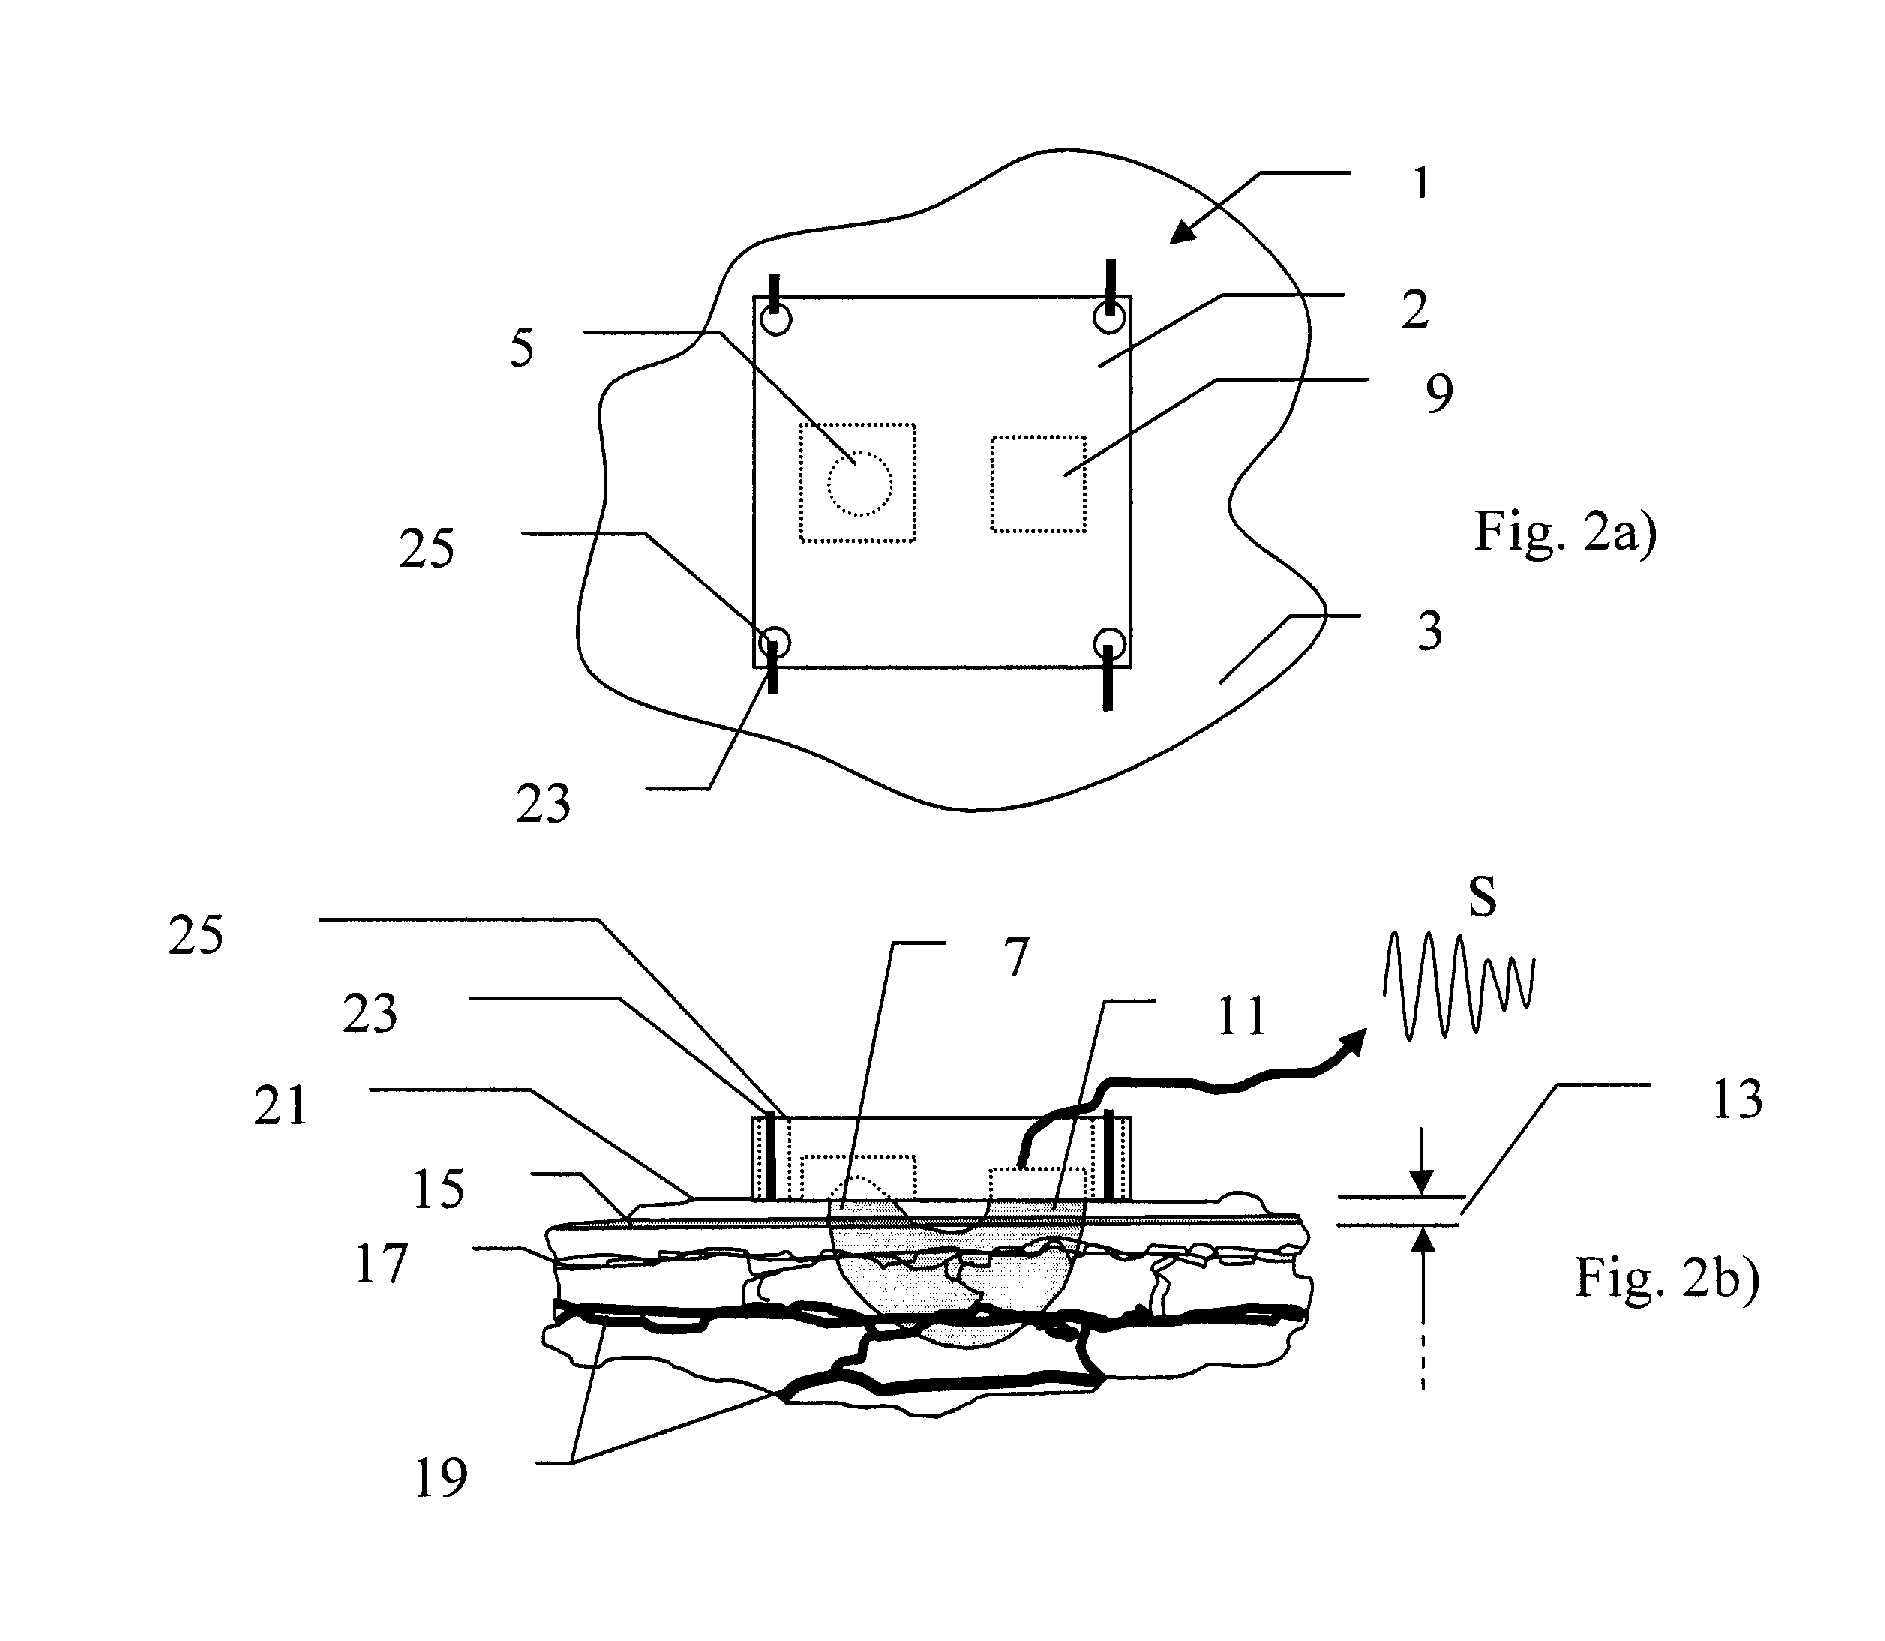 Method and device to detect eating, to control artificial gastric stimulation